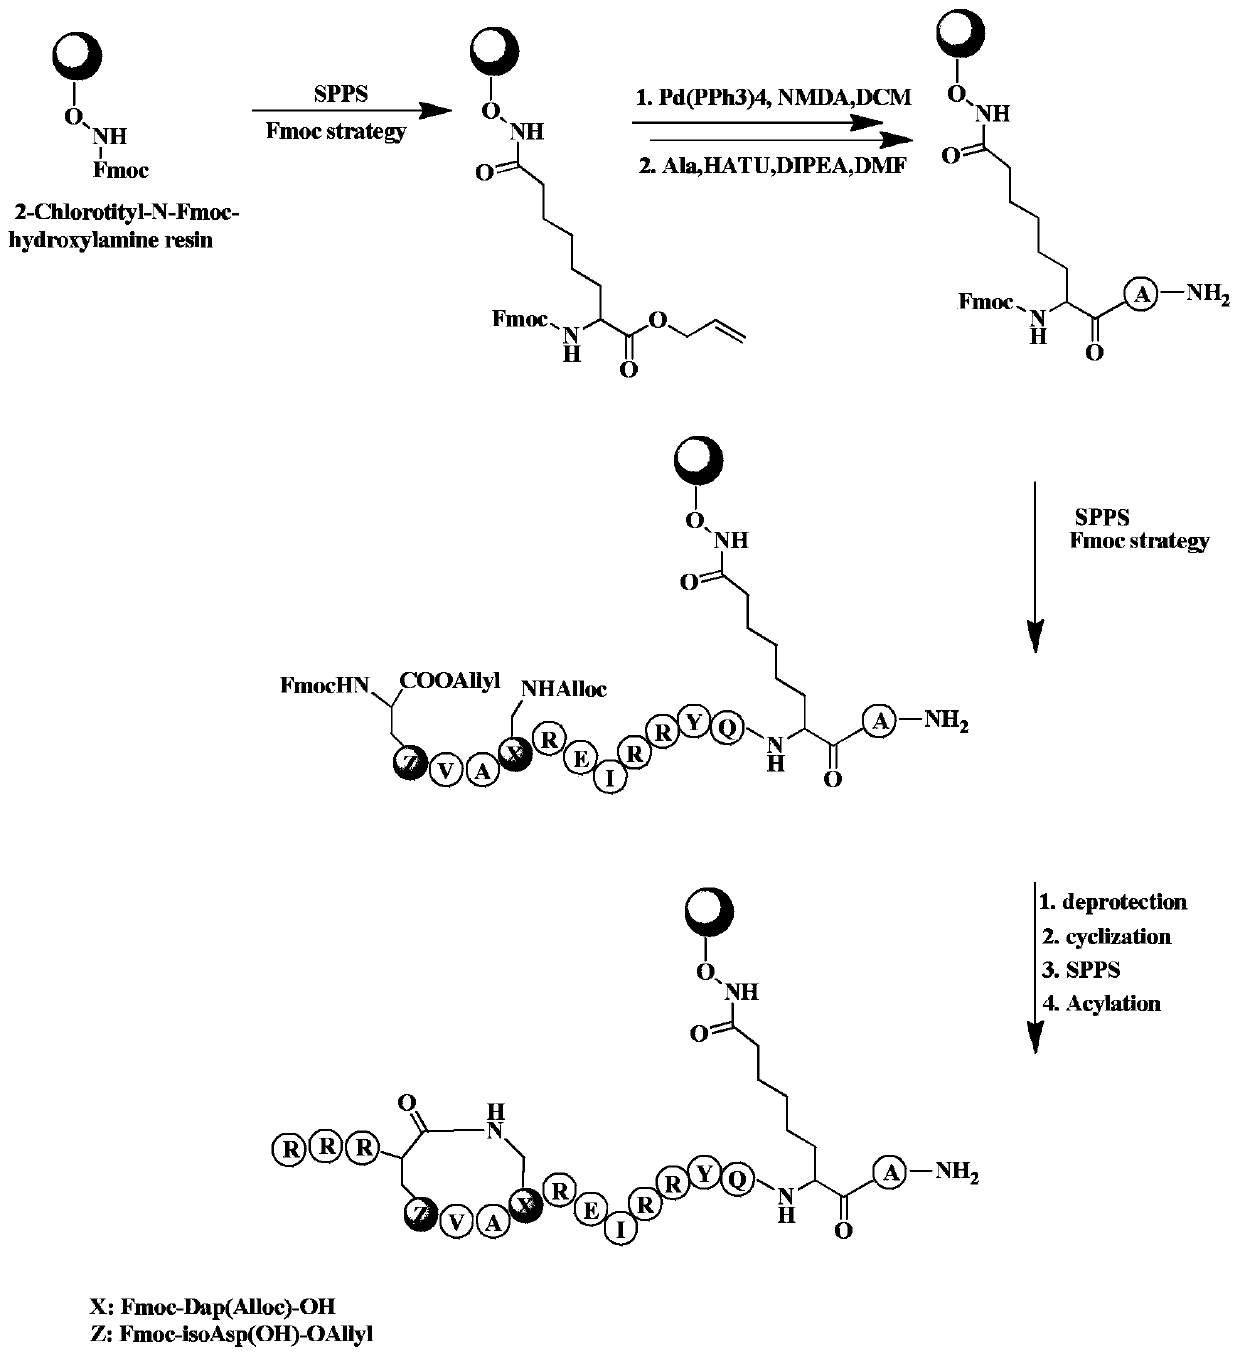 Stable polypeptide inhibitor targeting HDAC and application of stable polypeptide inhibitor